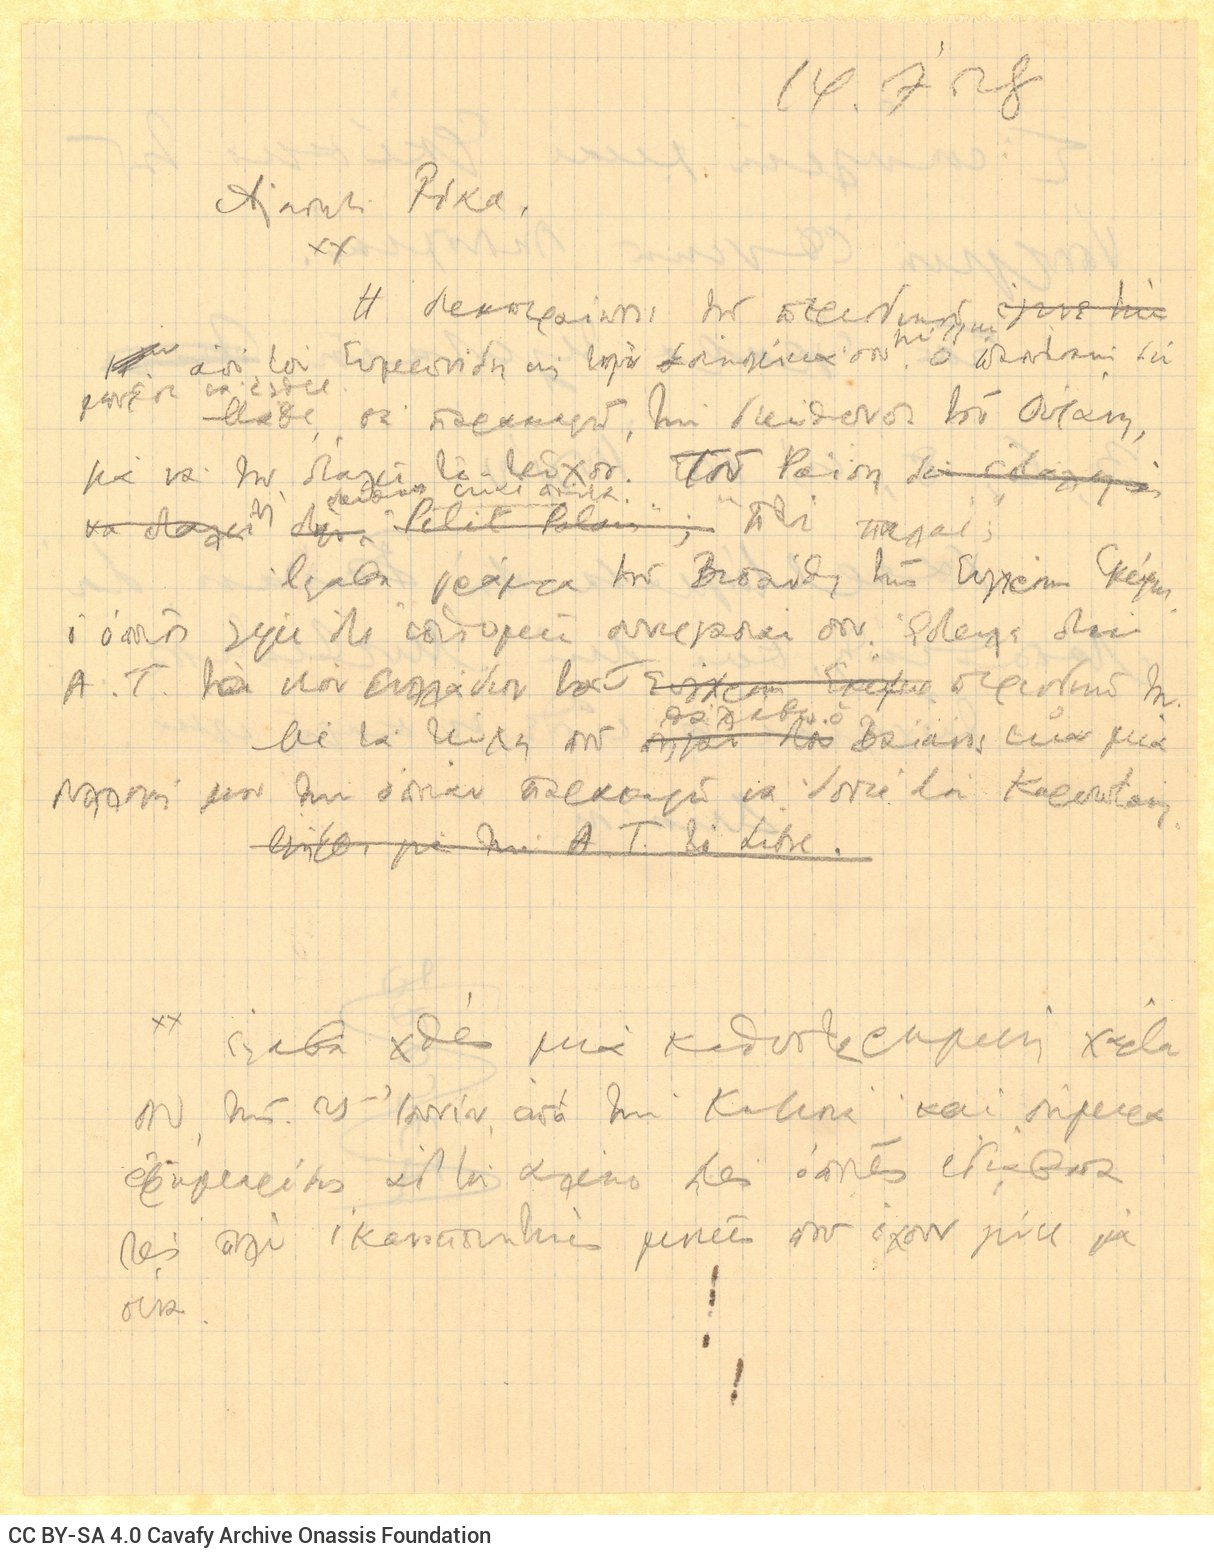 Handwritten draft letter by Cavafy to Rica [Singopoulo] on both sides of a sheet. The poet refers to the publication of the i